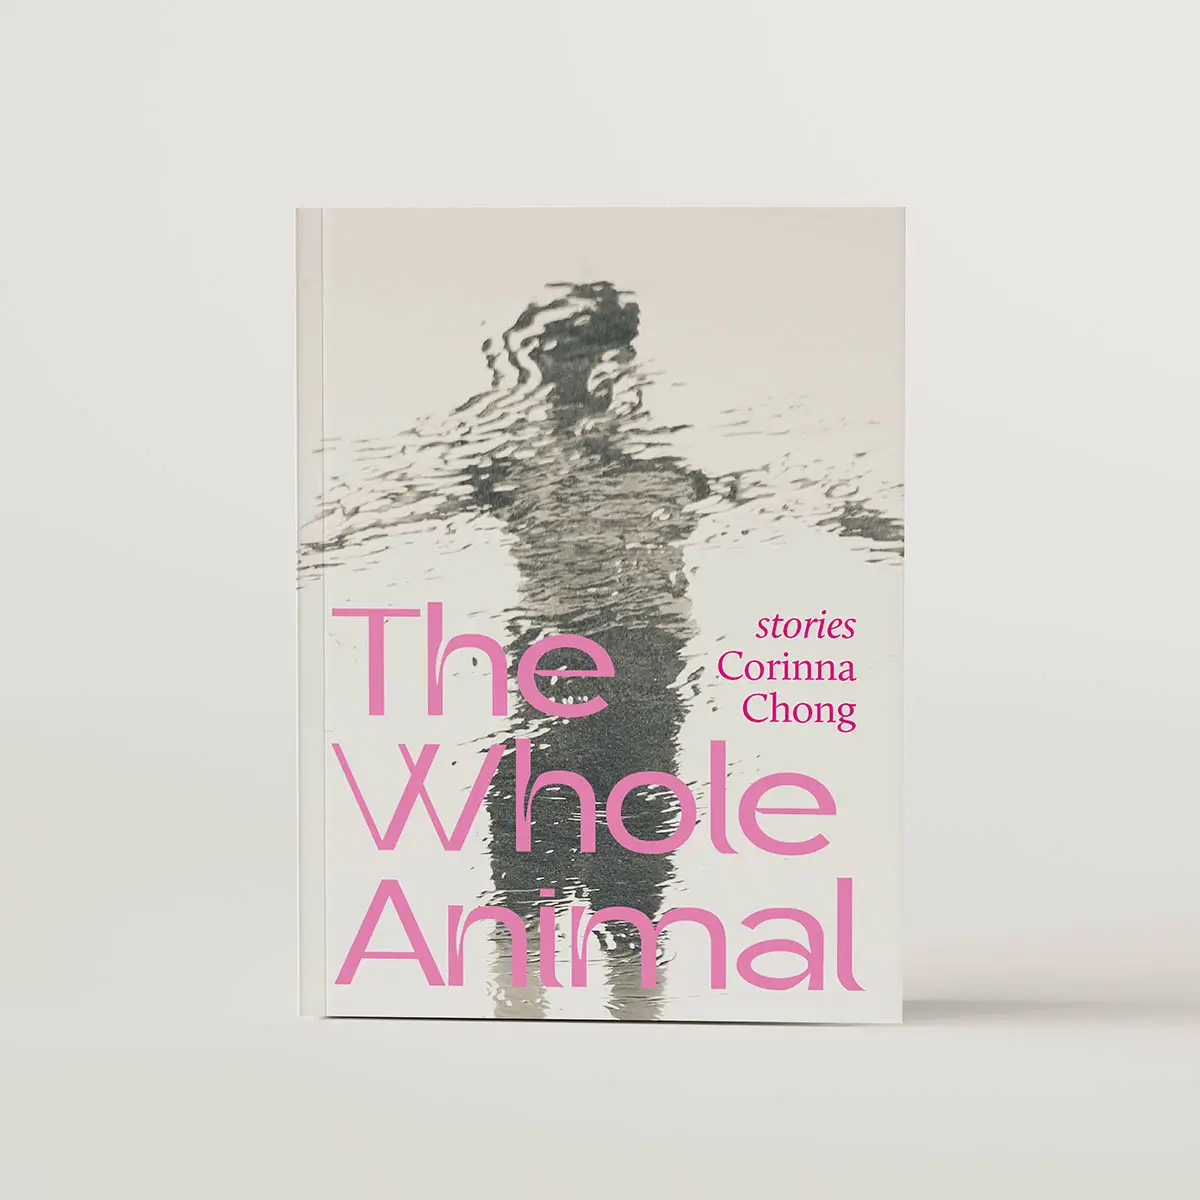 The Whole Animal book cover concept with an upside down reflection of a kid in a puddle with arms outstretched.